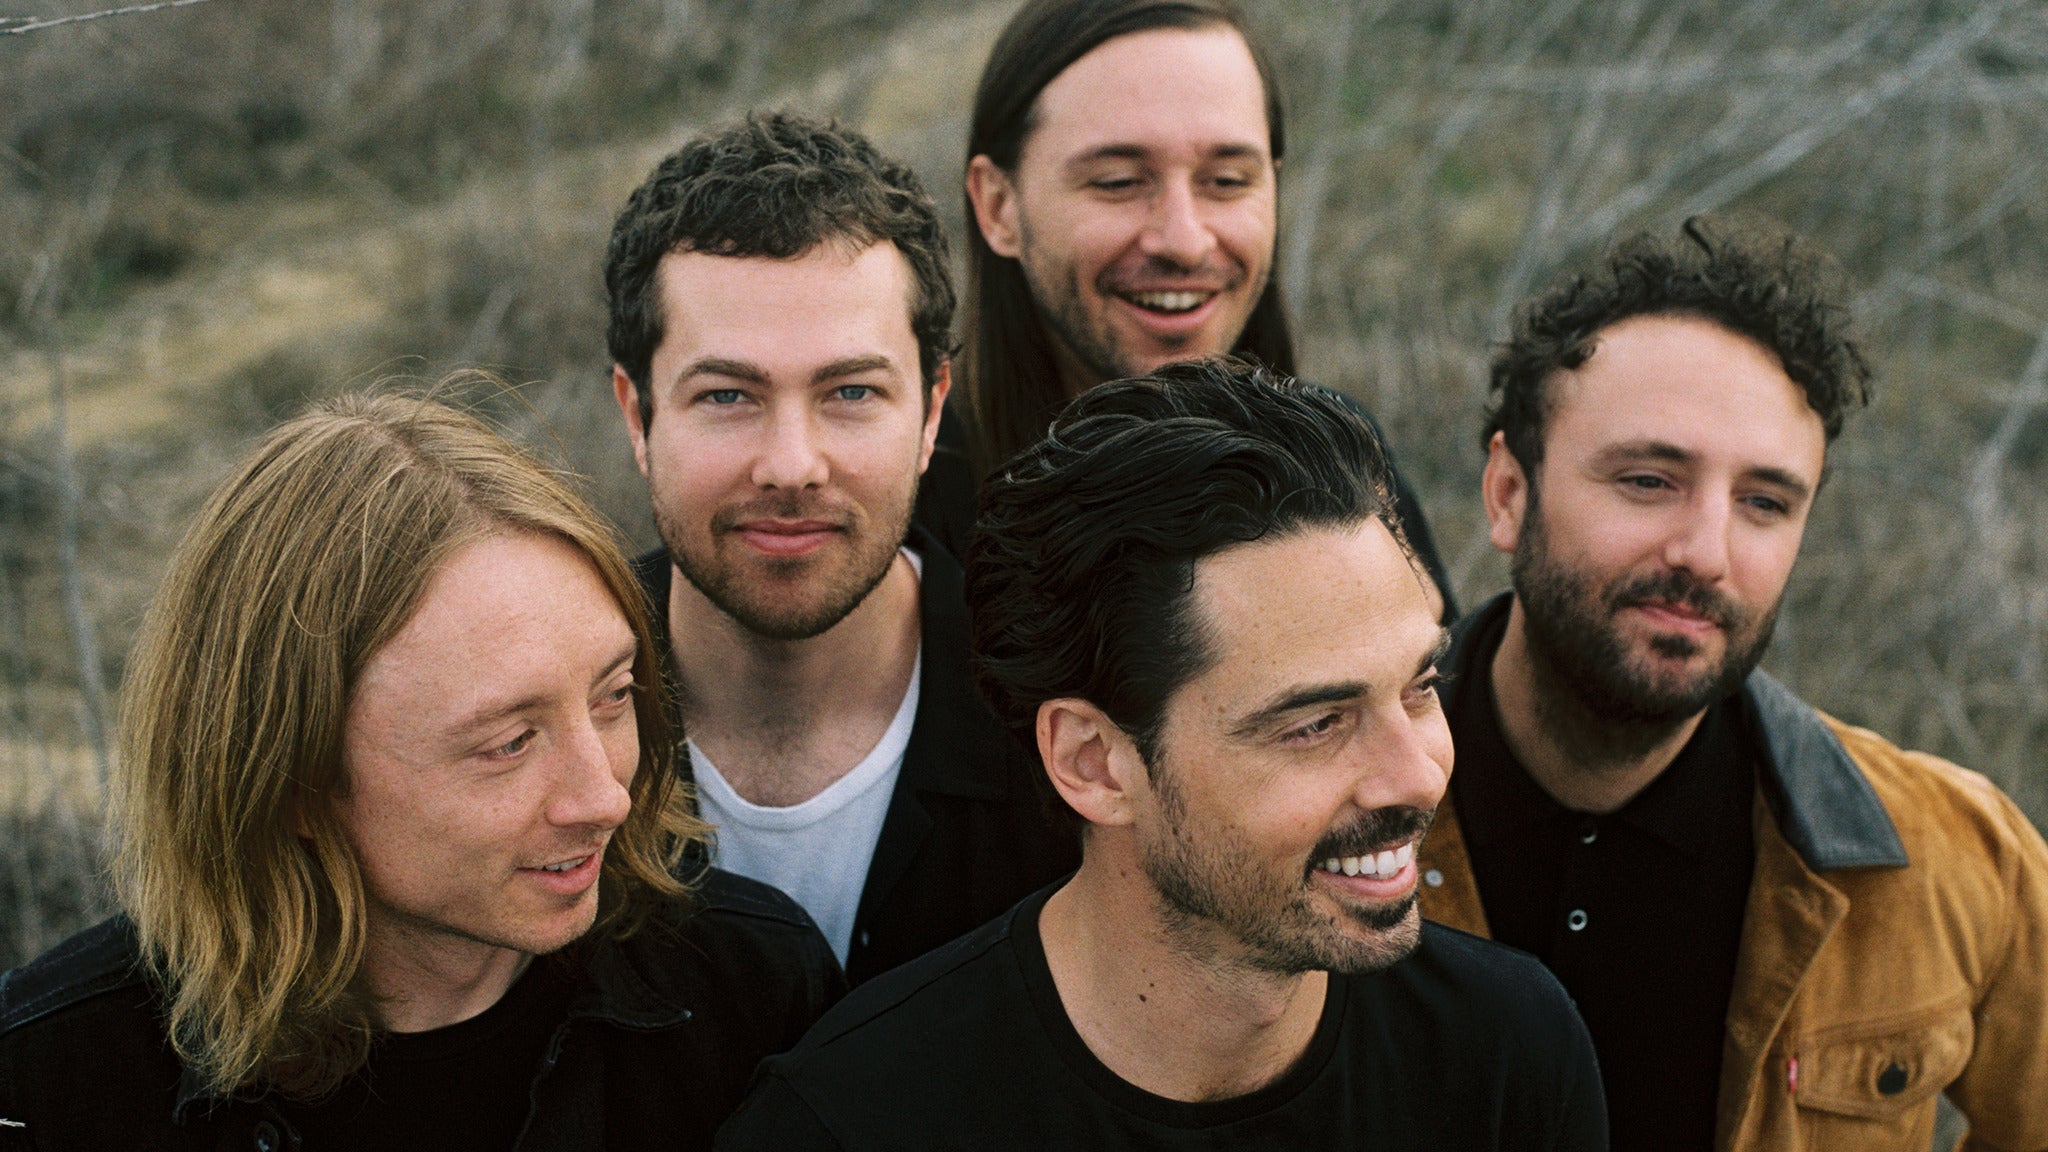 Local Natives pre-sale password for early tickets in Los Angeles